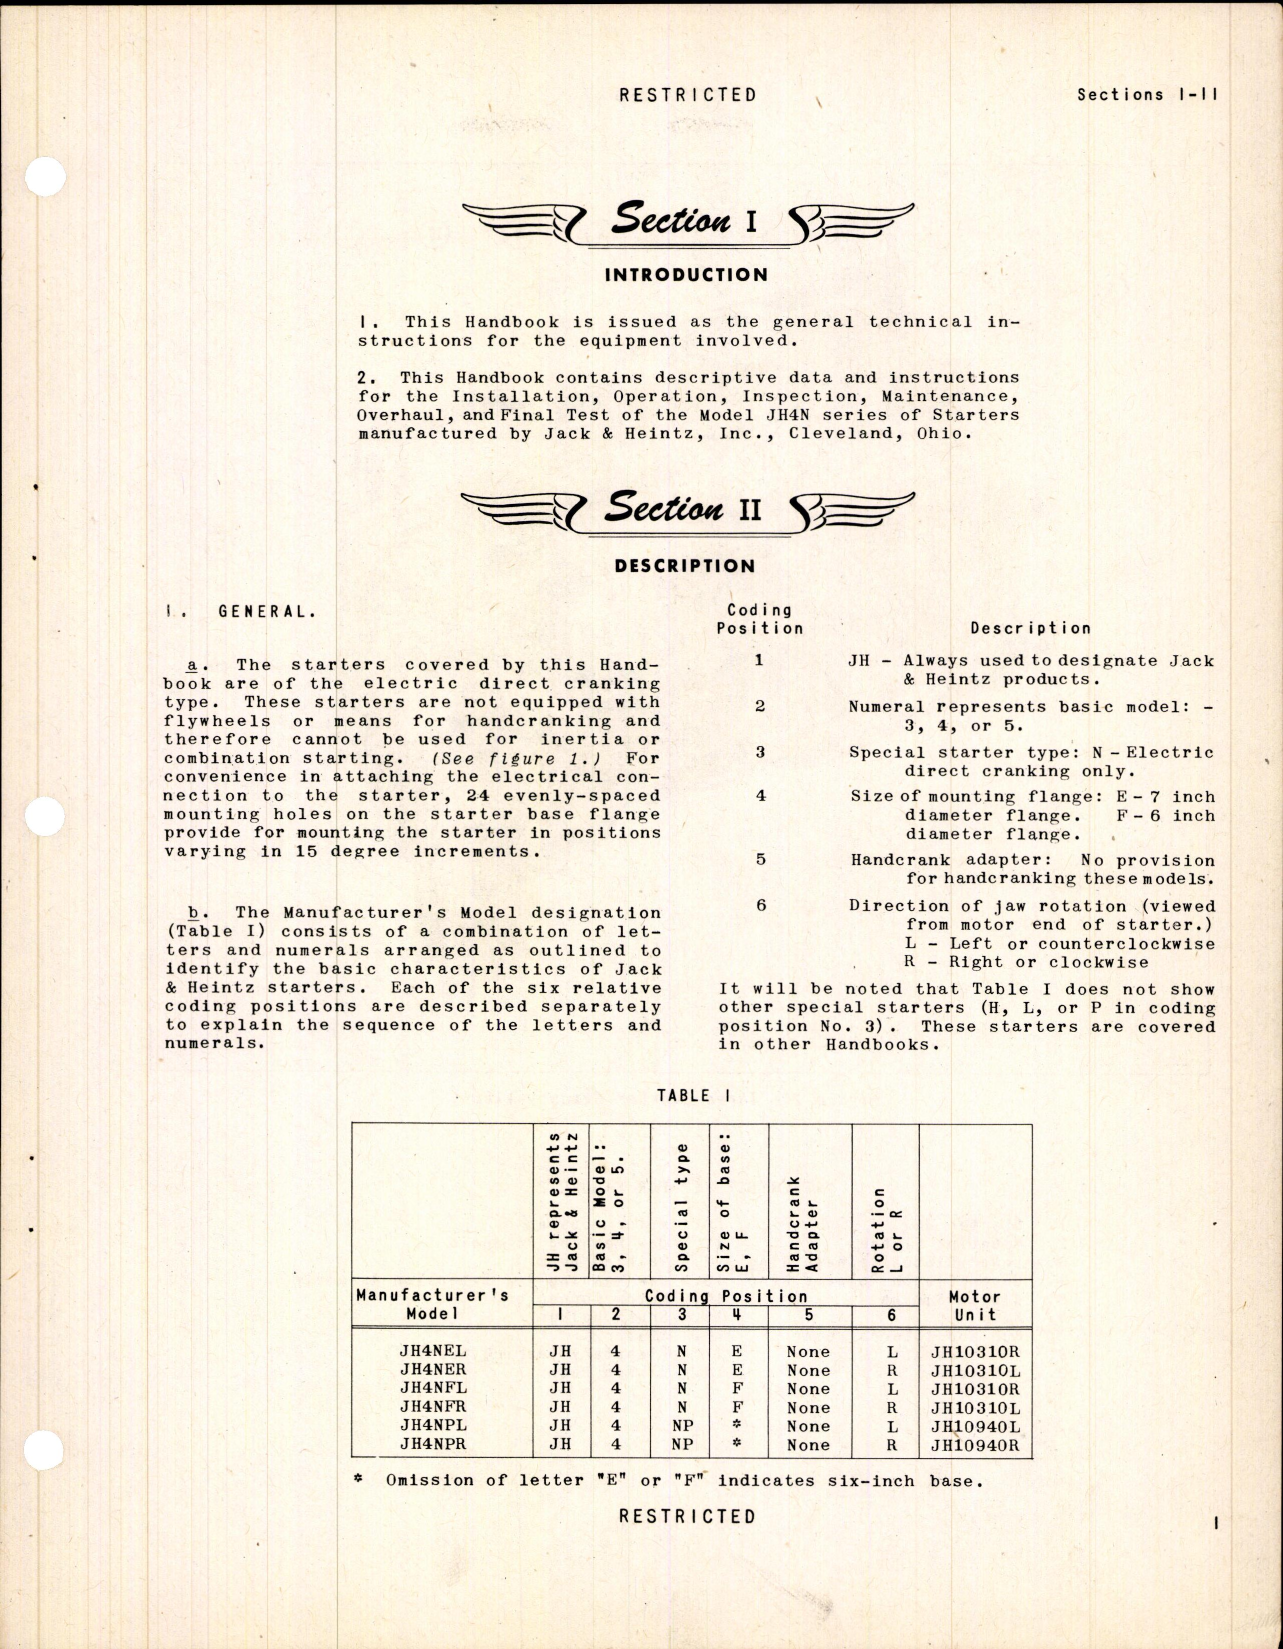 Sample page 7 from AirCorps Library document: Handbook of Instructions with Parts Catalog for Jahco Electric Starters Models JH4NE, JH4NF, and JH4NP Series